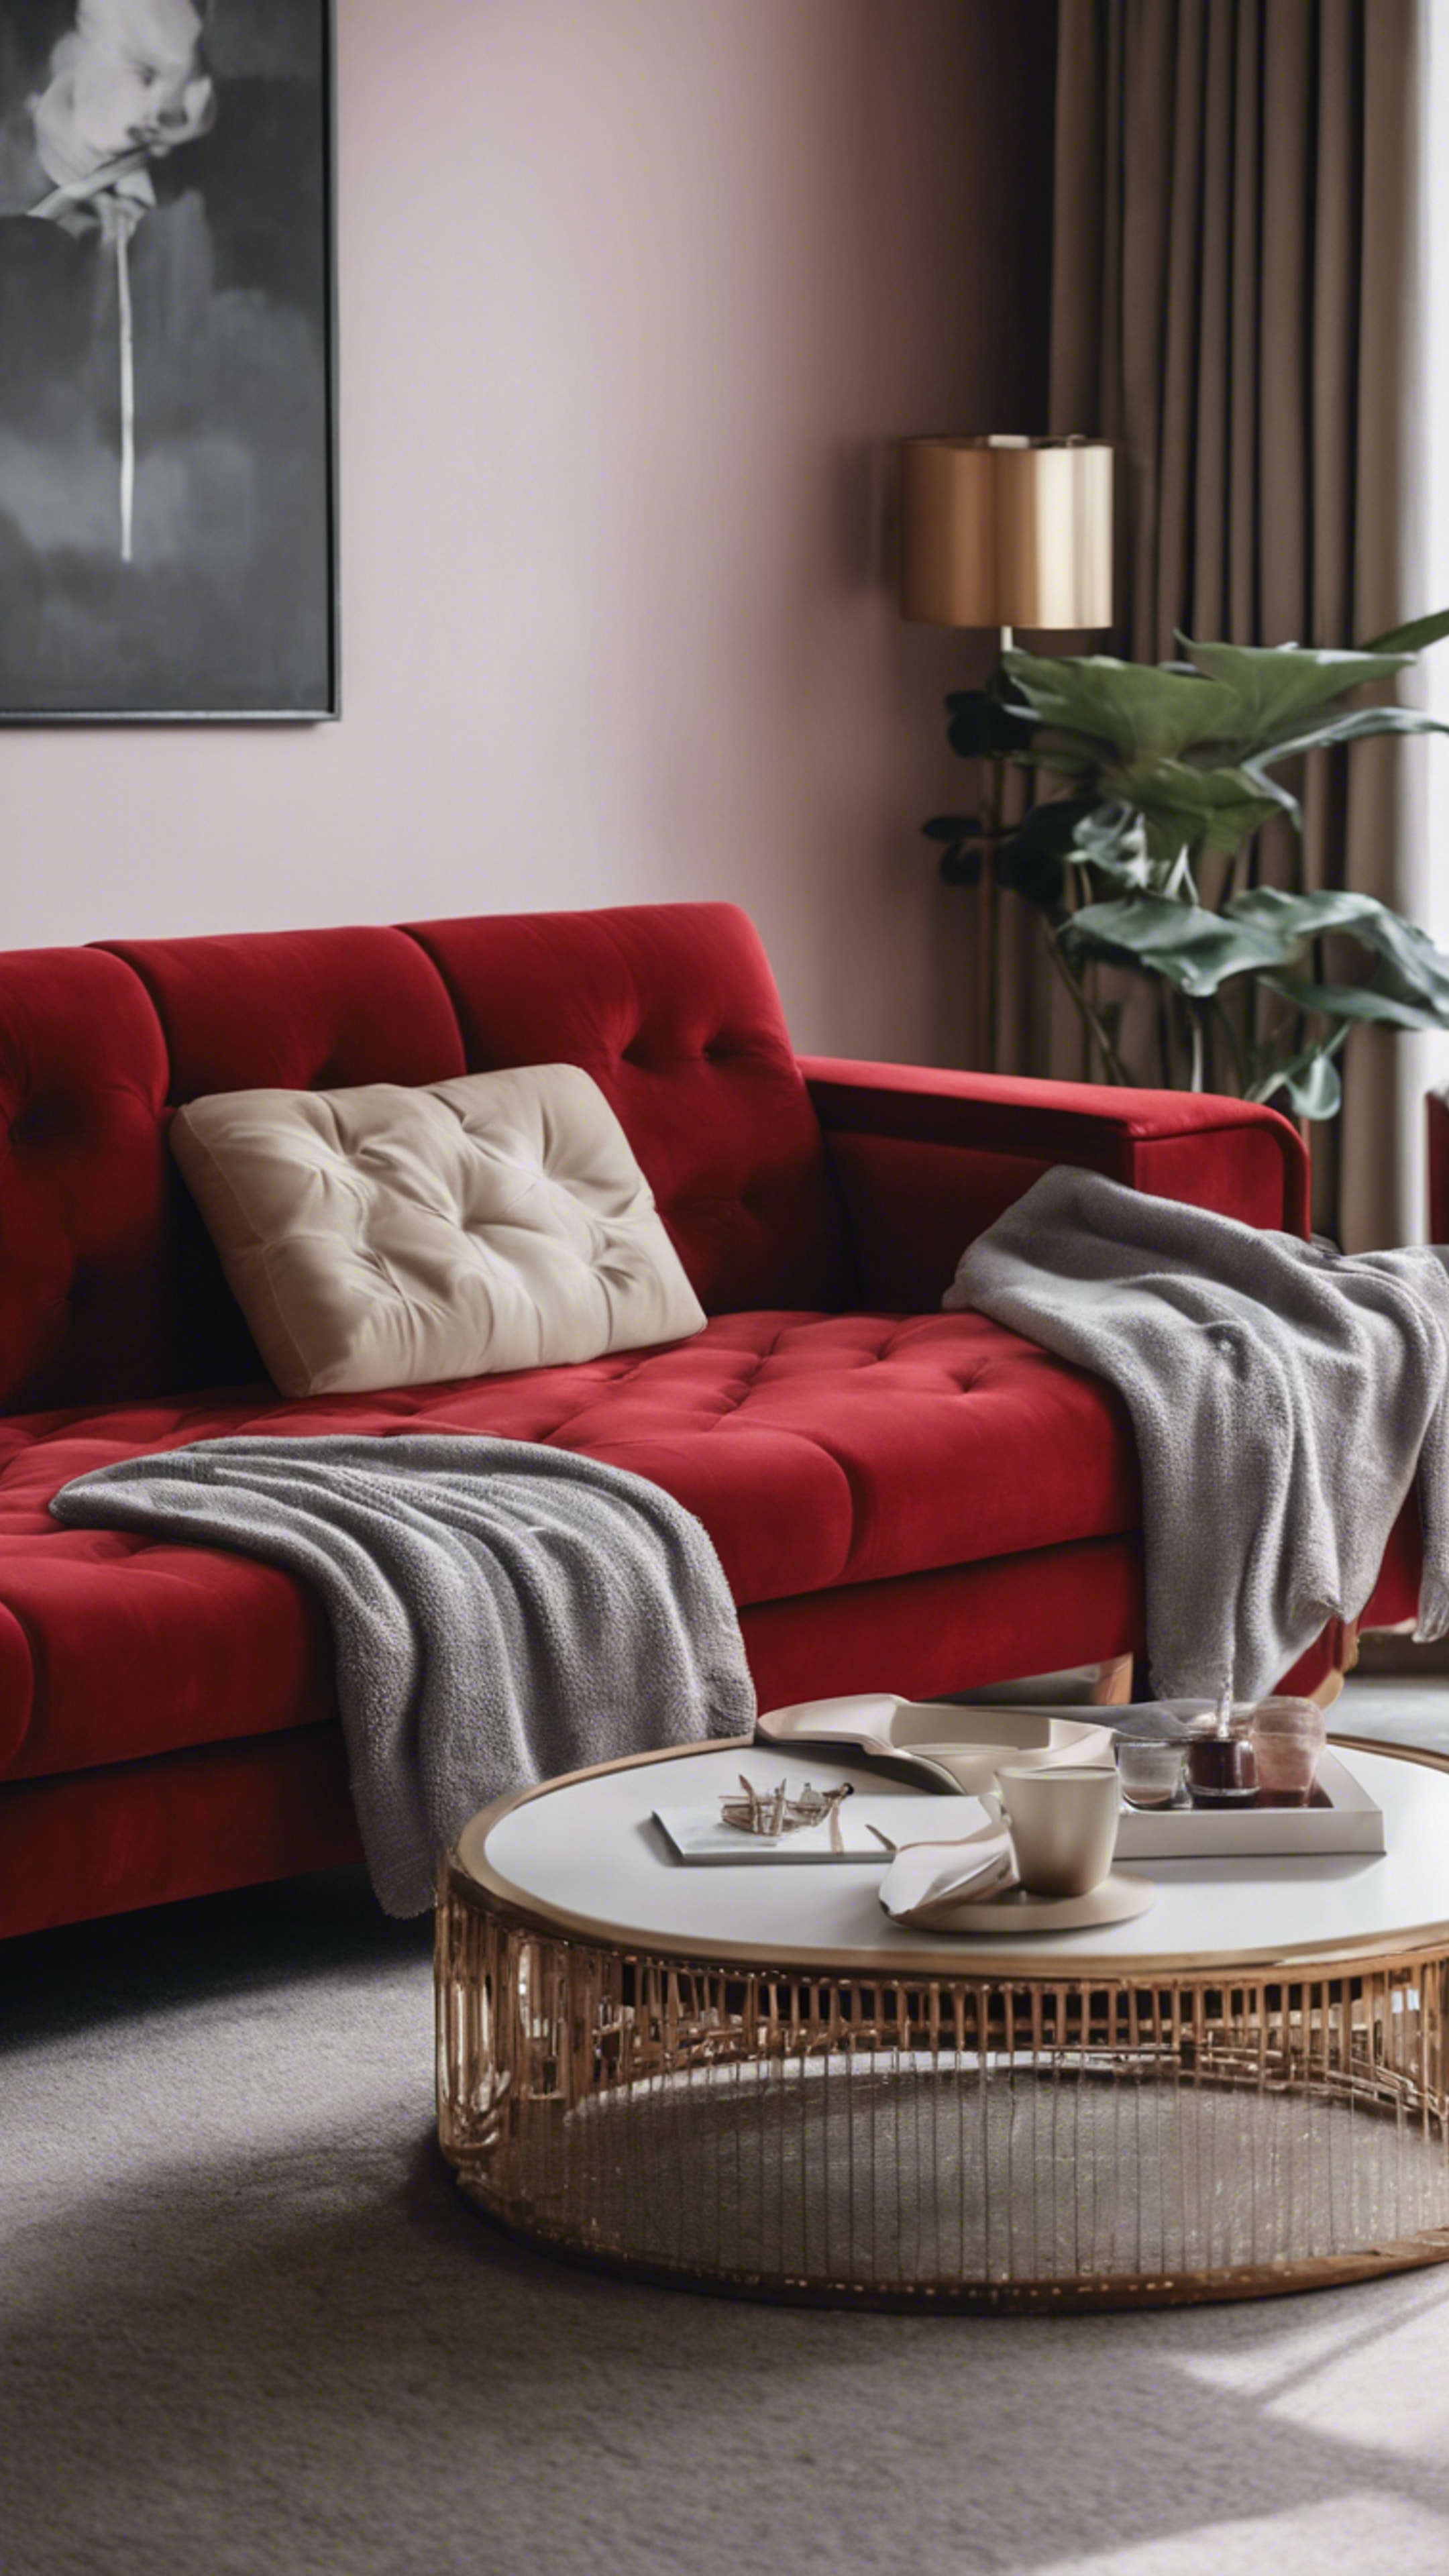 A luxurious red velvet sofa in a minimalistic modern living room, its color standing out in an otherwise neutral scene. Тапет[9f5c54c2b7d04d069b86]